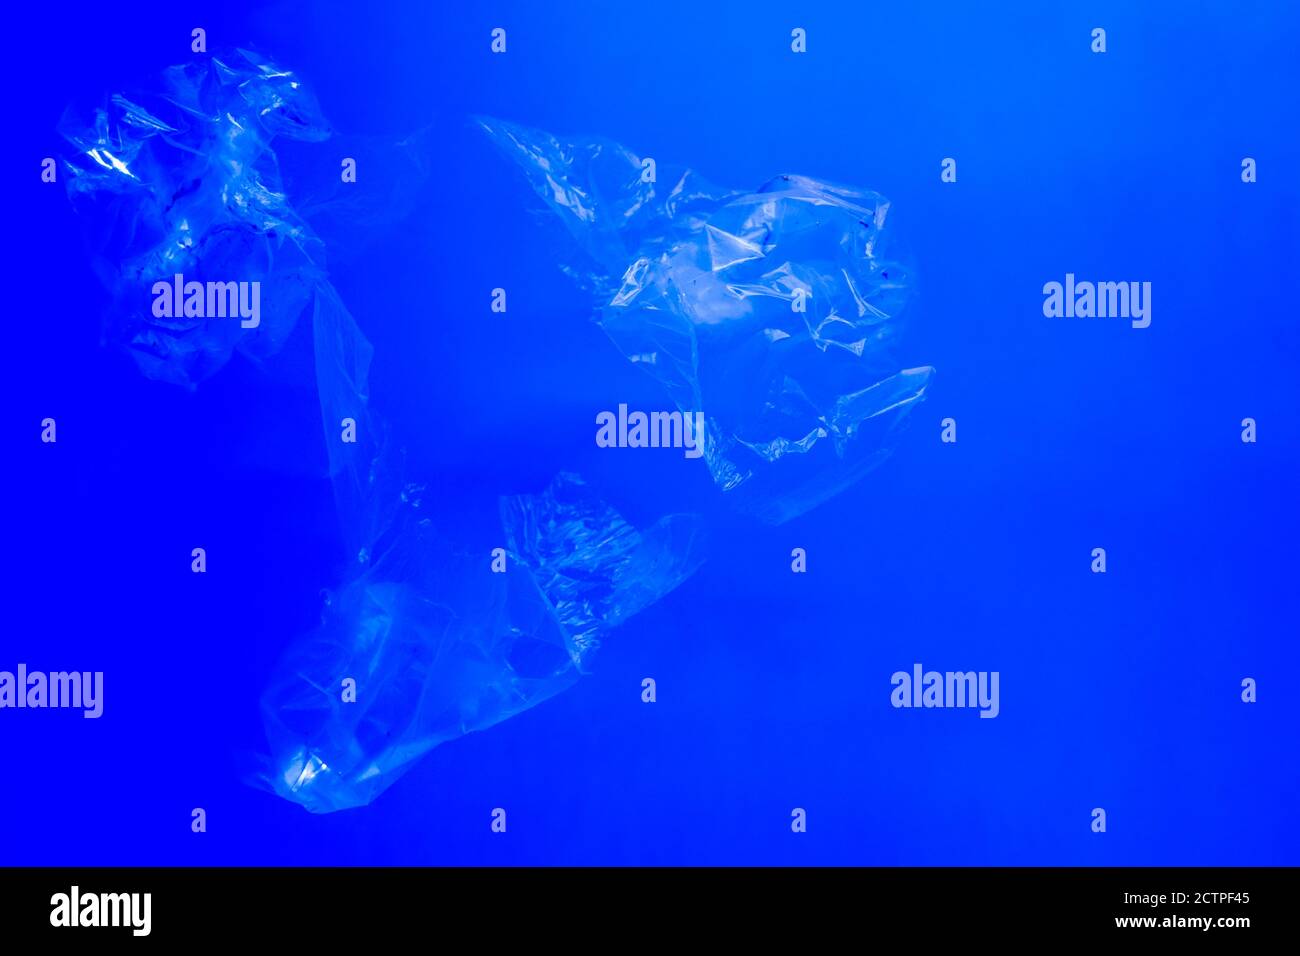 Transparent plastic bags floating underwater in blue ocean sea water, pollution by non-biodegradable plastic waste, hazard for marine wildlife Stock Photo